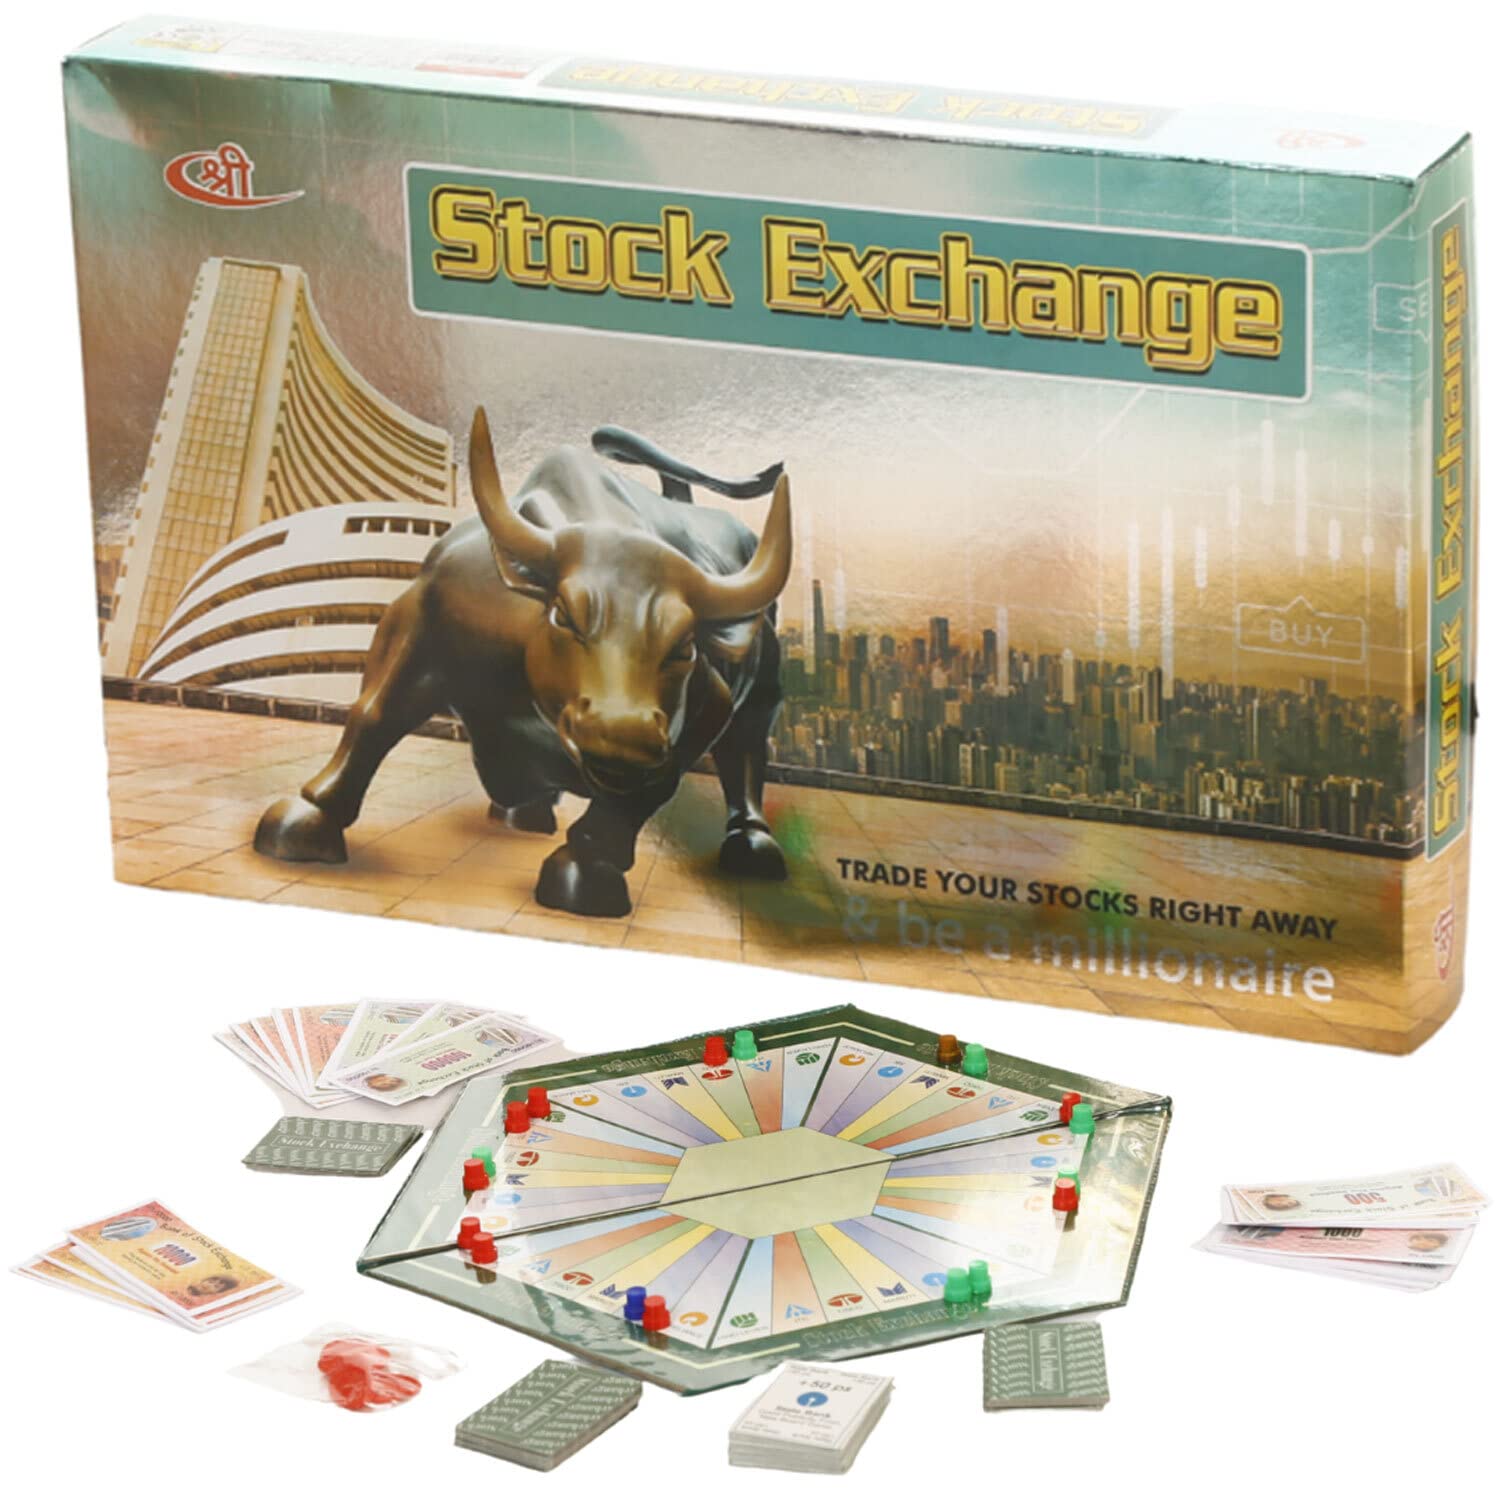 Kids Mandi stock exchange board game, educational and fun, for 2-6 players.